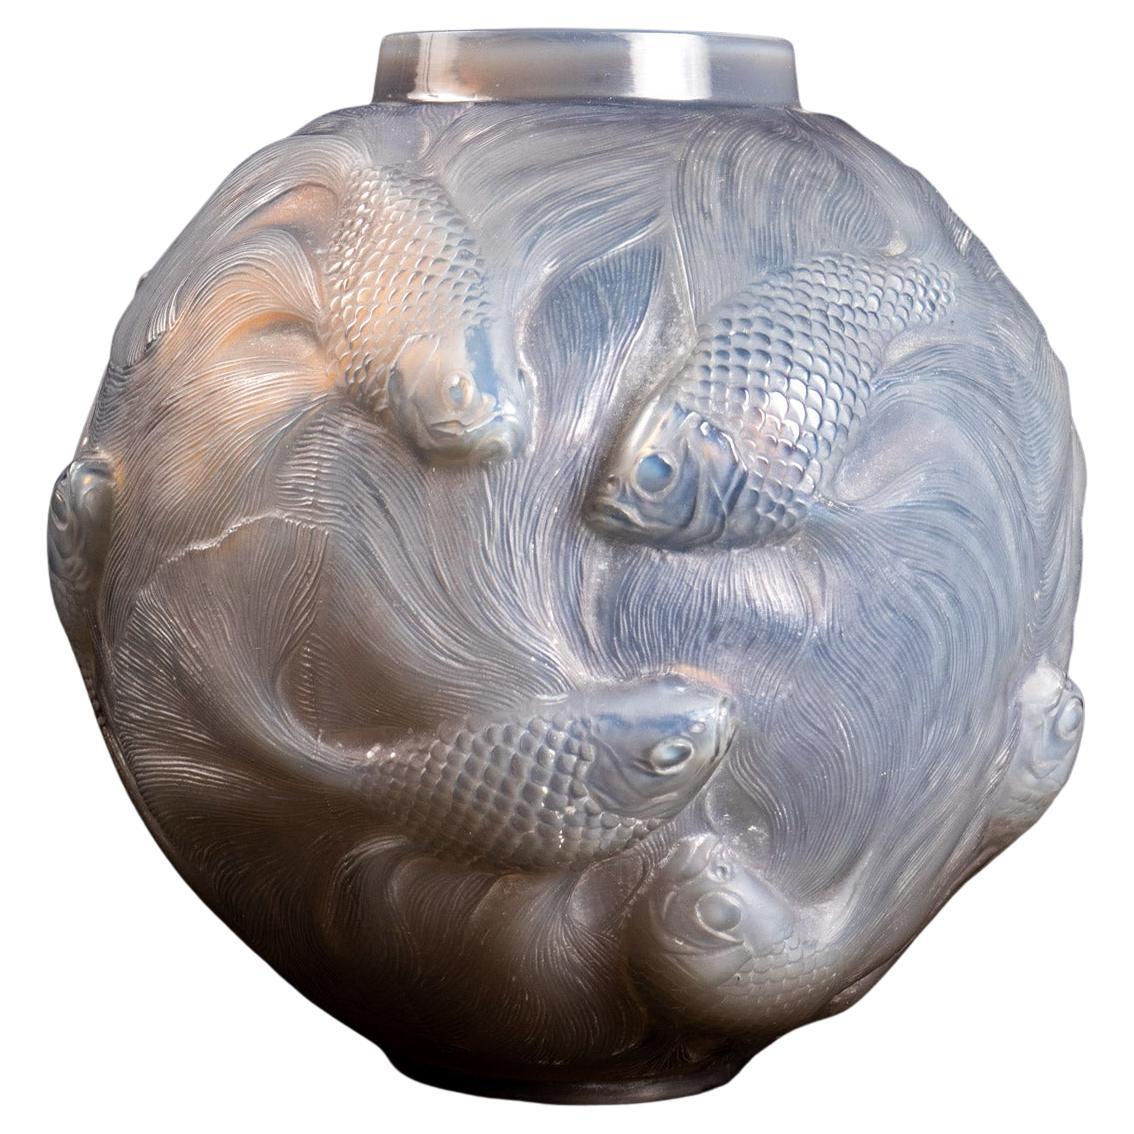 1924 René Lalique, Vase Formose Agate Glass 'Double Cased Opalescent and Grey'